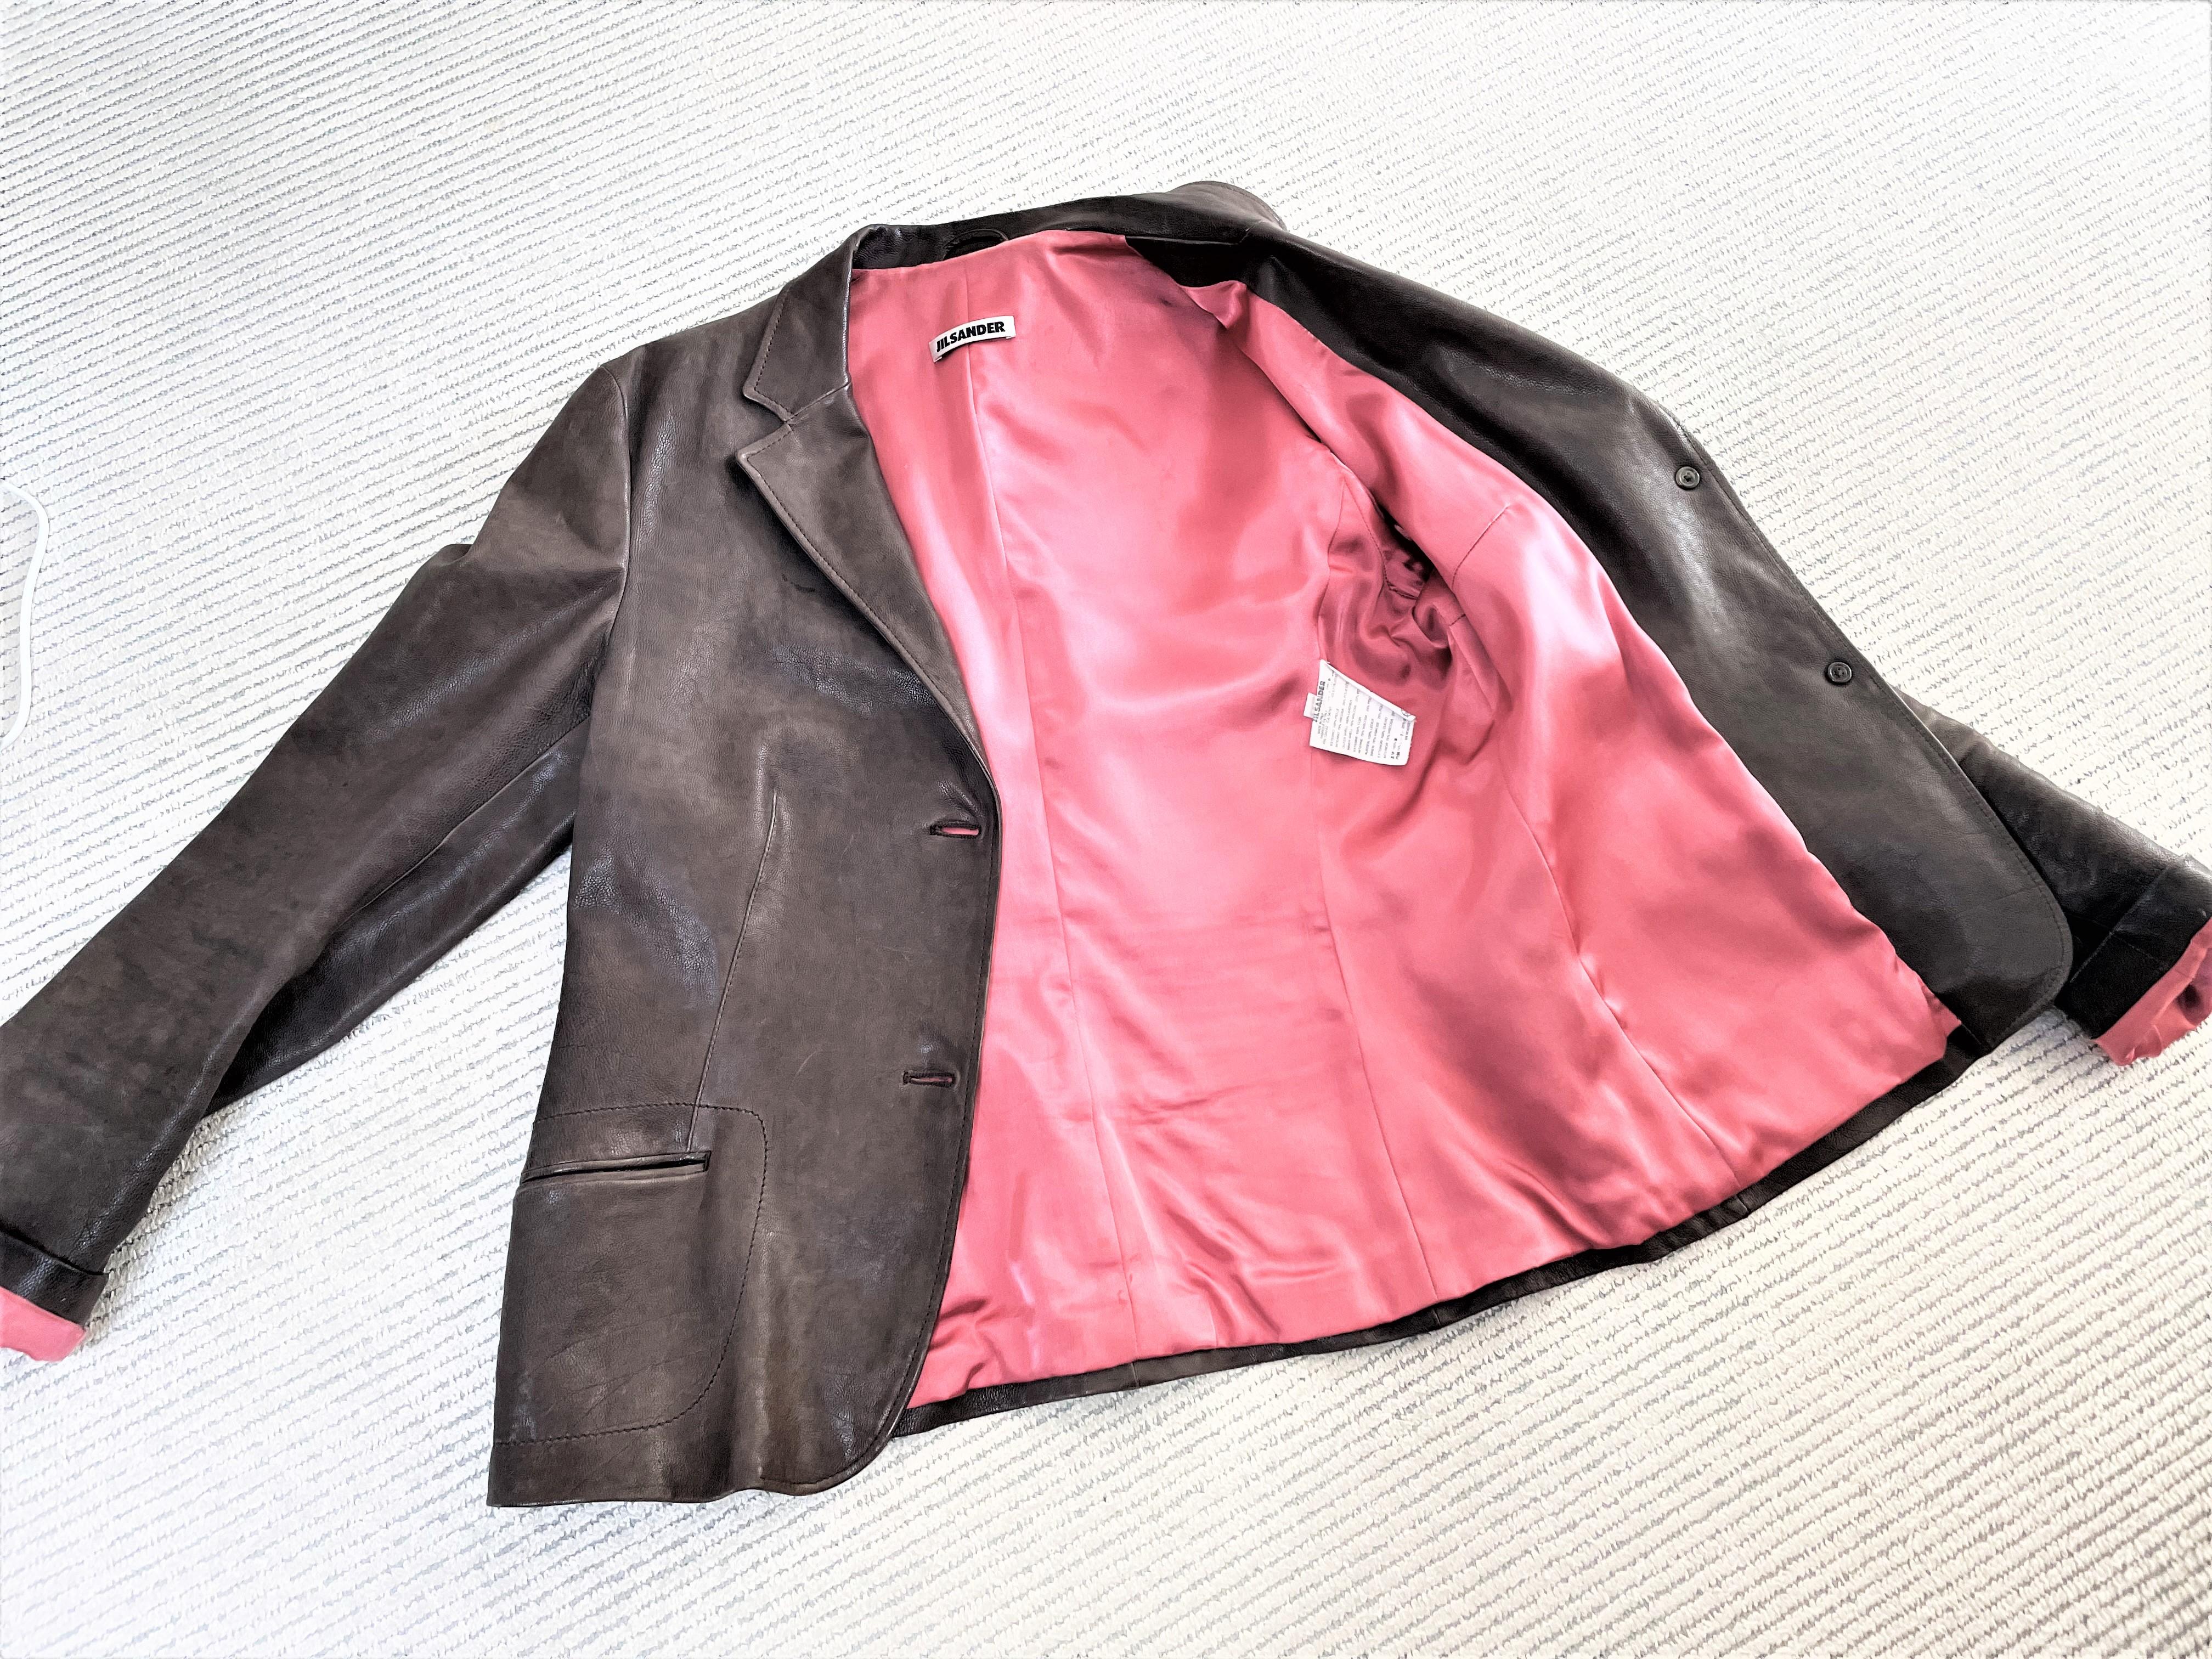  Smooth Leather Blazer by Jil Sander brown, pink lining size 44 For Sale 3